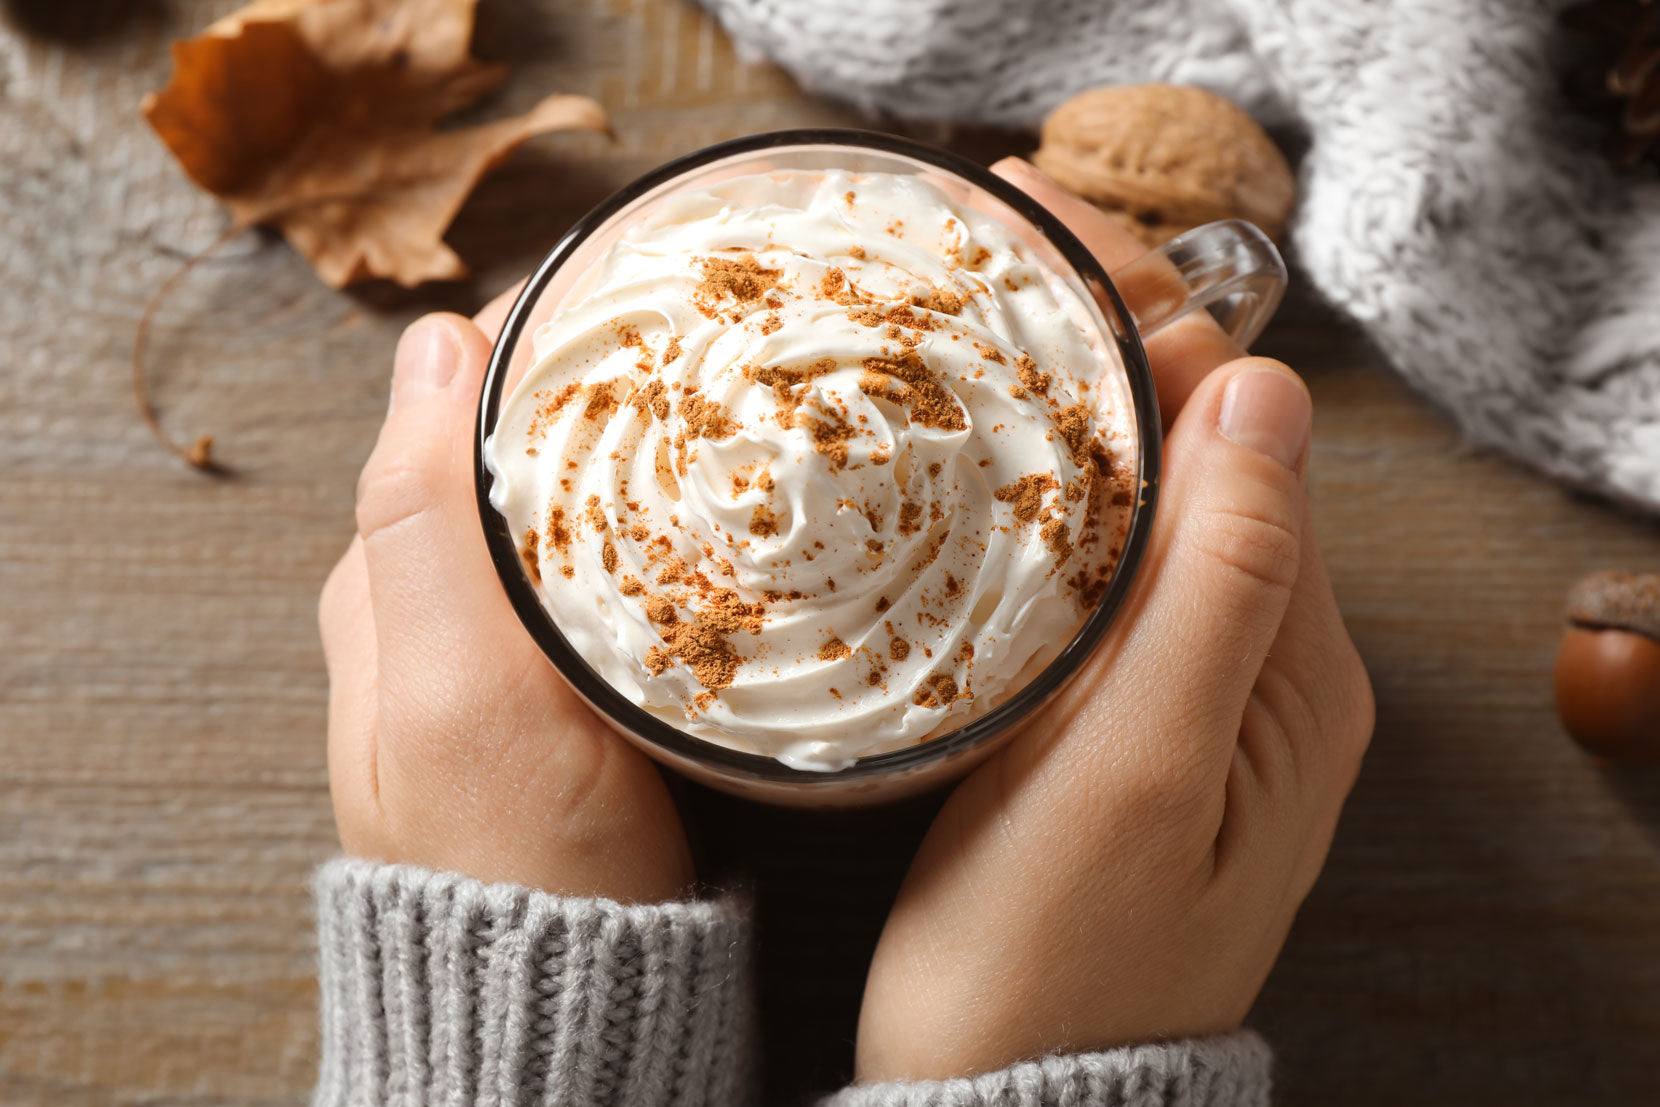 Pumpkin Spice is packed with “warming spices.”